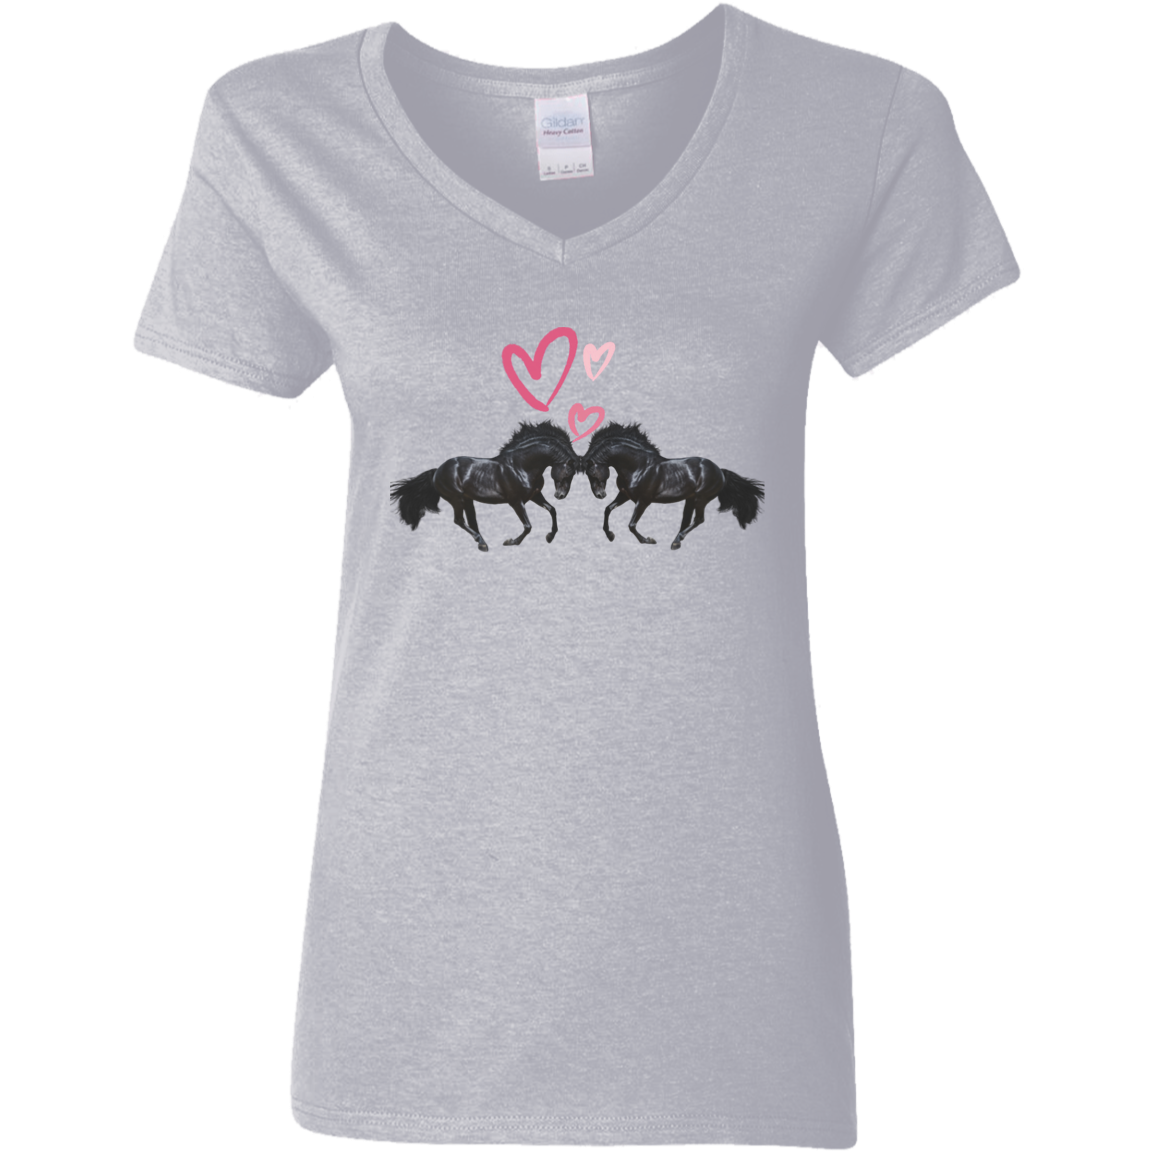 Love of Horses Ladies T-Shirt - MyAllOutHorses